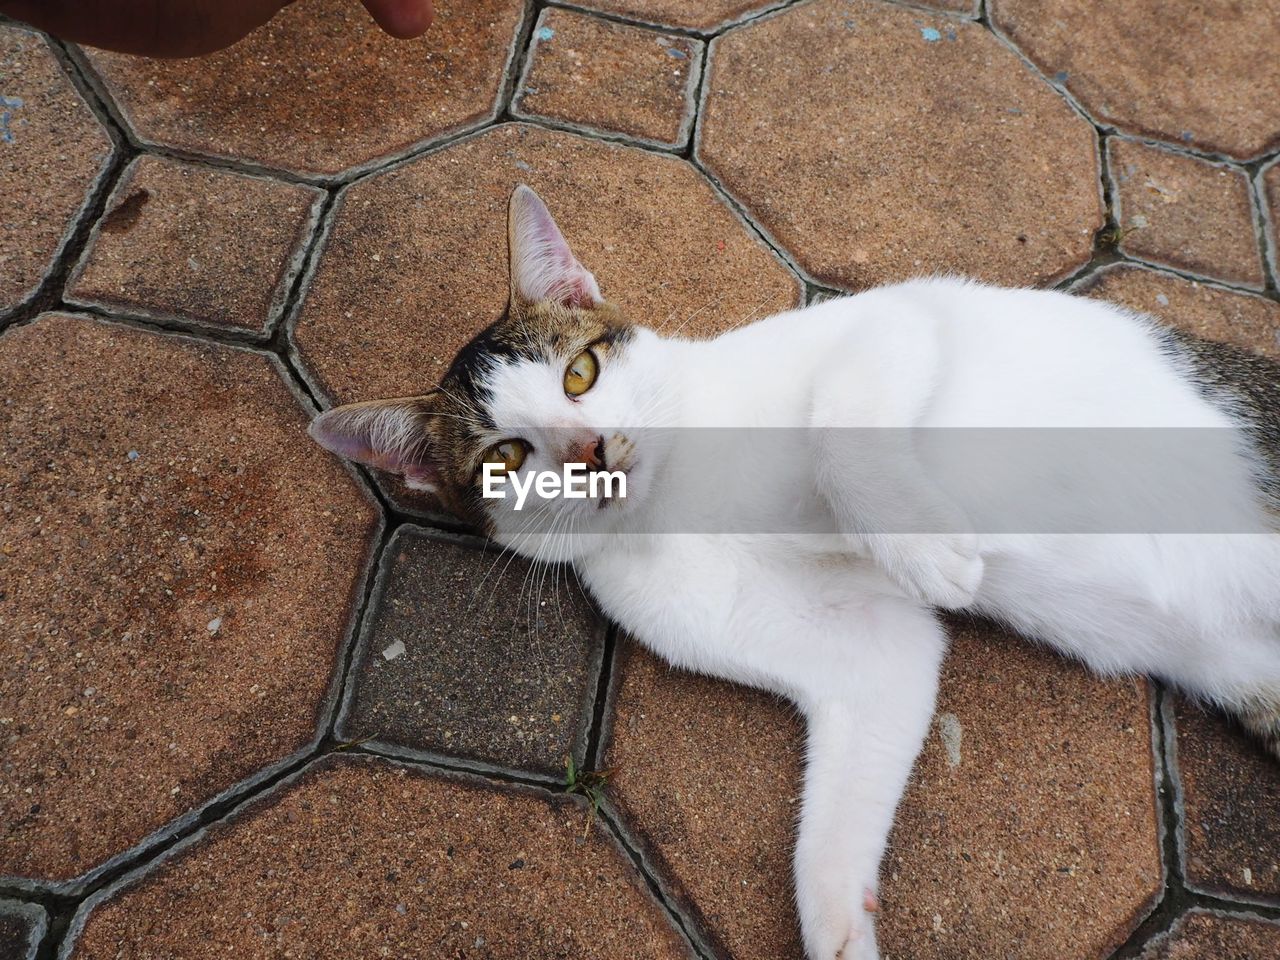 HIGH ANGLE VIEW PORTRAIT OF WHITE CAT STANDING ON TILED FLOOR